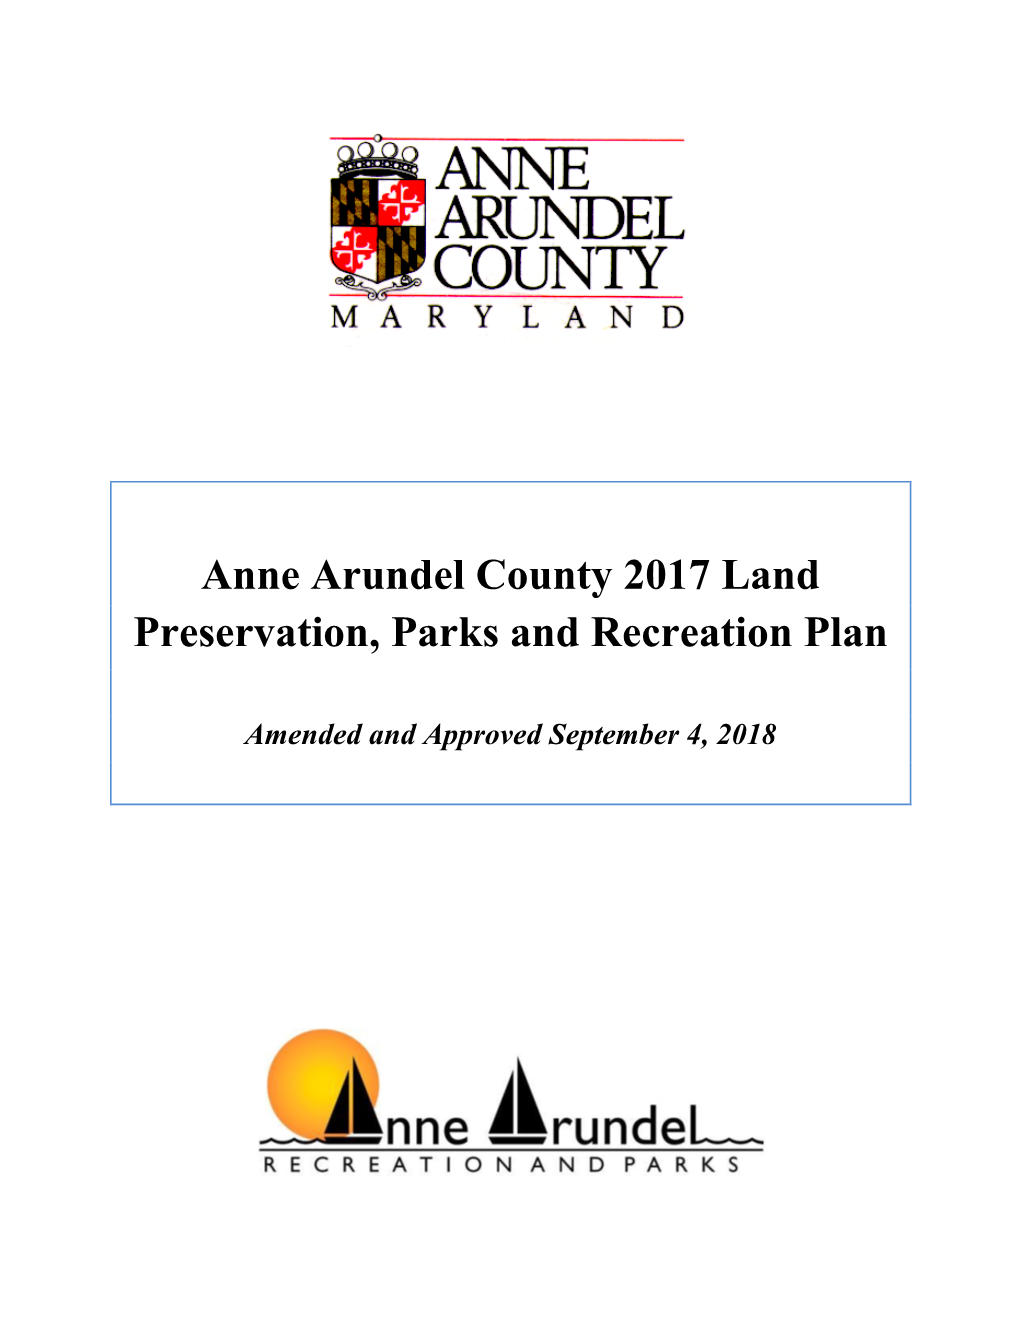 Anne Arundel County 2017 Land Preservation, Parks and Recreation Plan